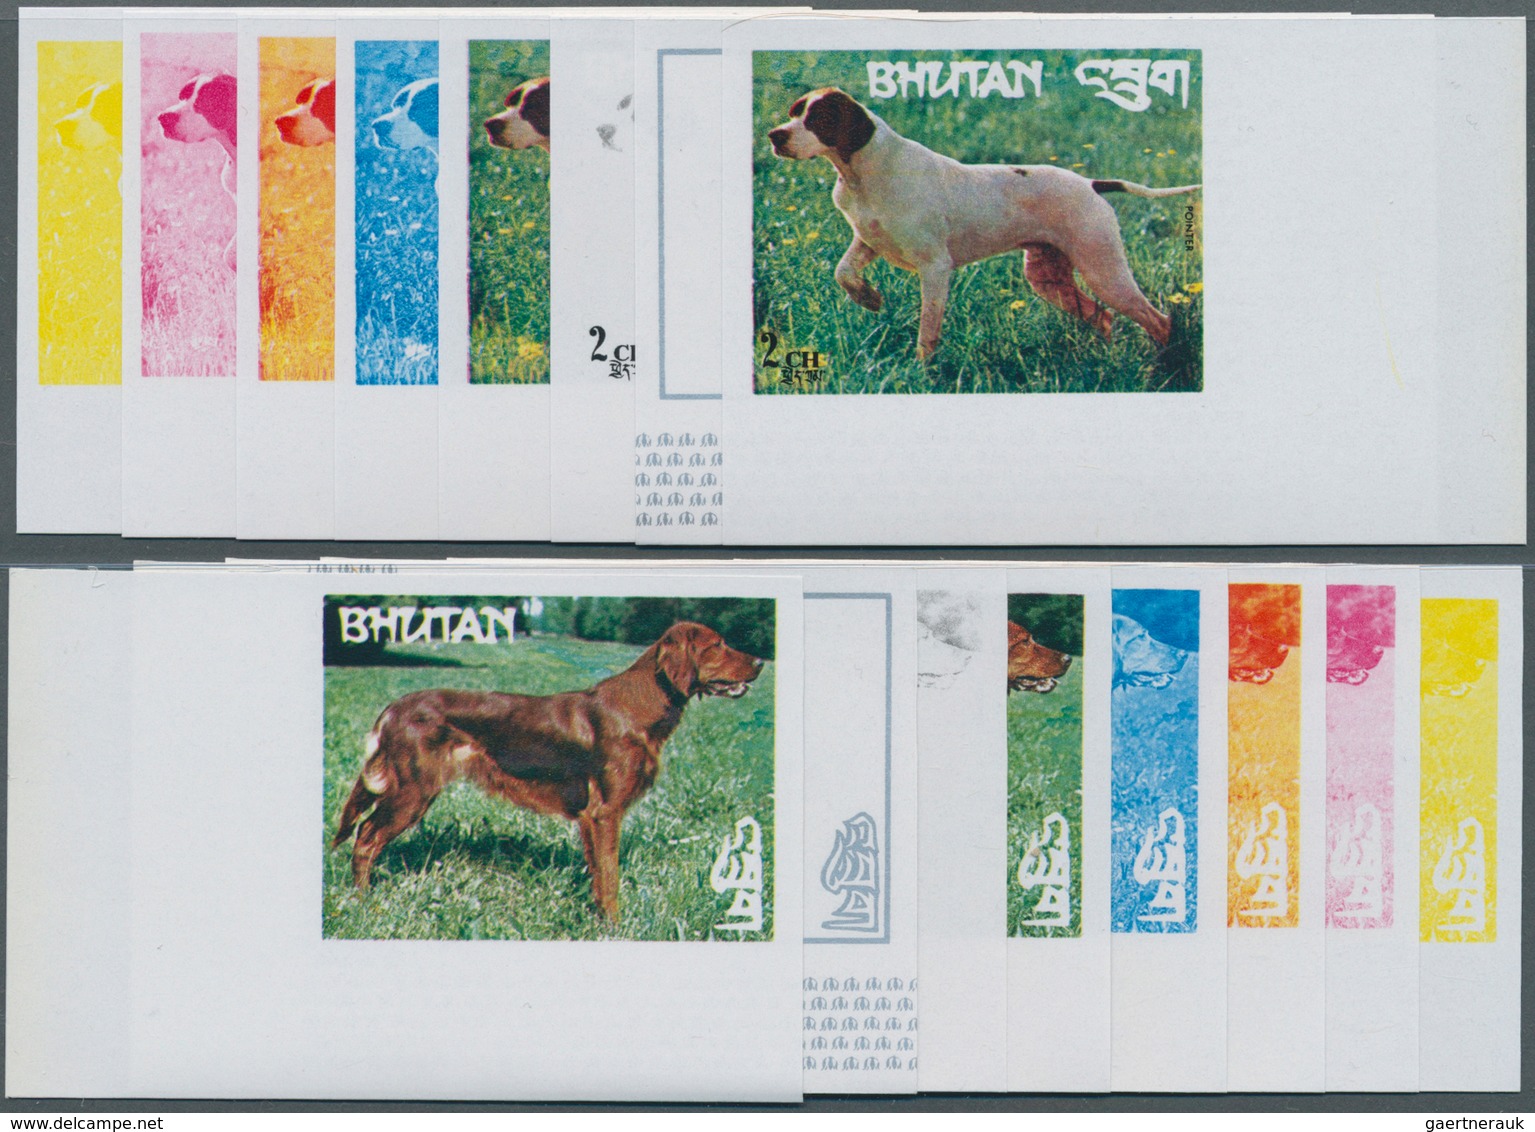 Thematik: Tiere-Hunde / animals-dogs: 1973, BHUTAN: dogs of the world complete set of eight values e